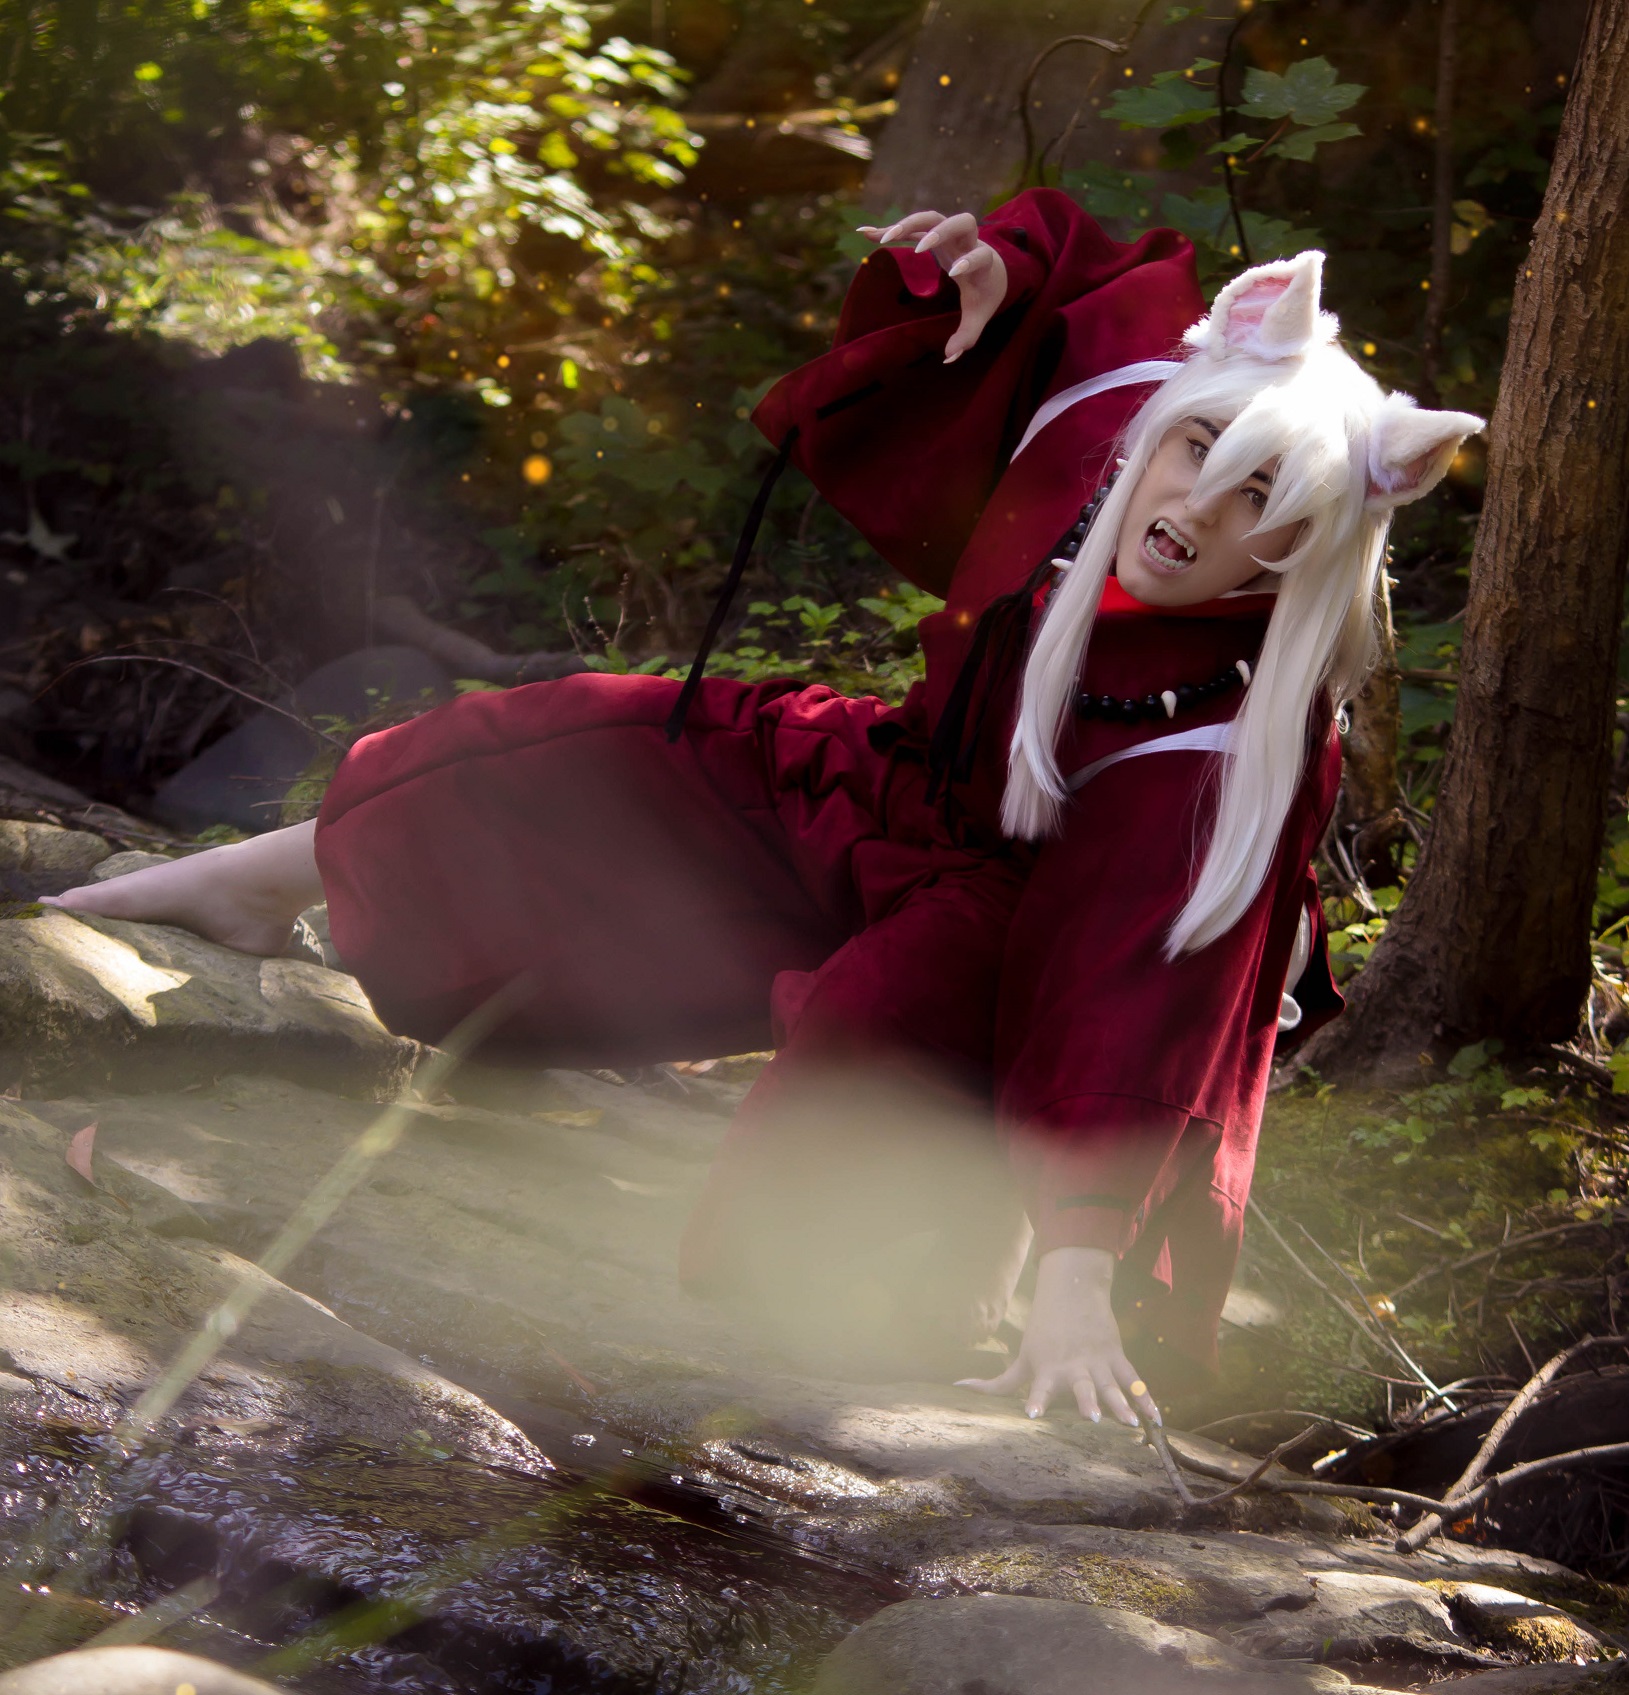 Cosplayer Sammit as Inuyasha from Inuyasha (costume by Emerald L King, photography and edit by Tessu)